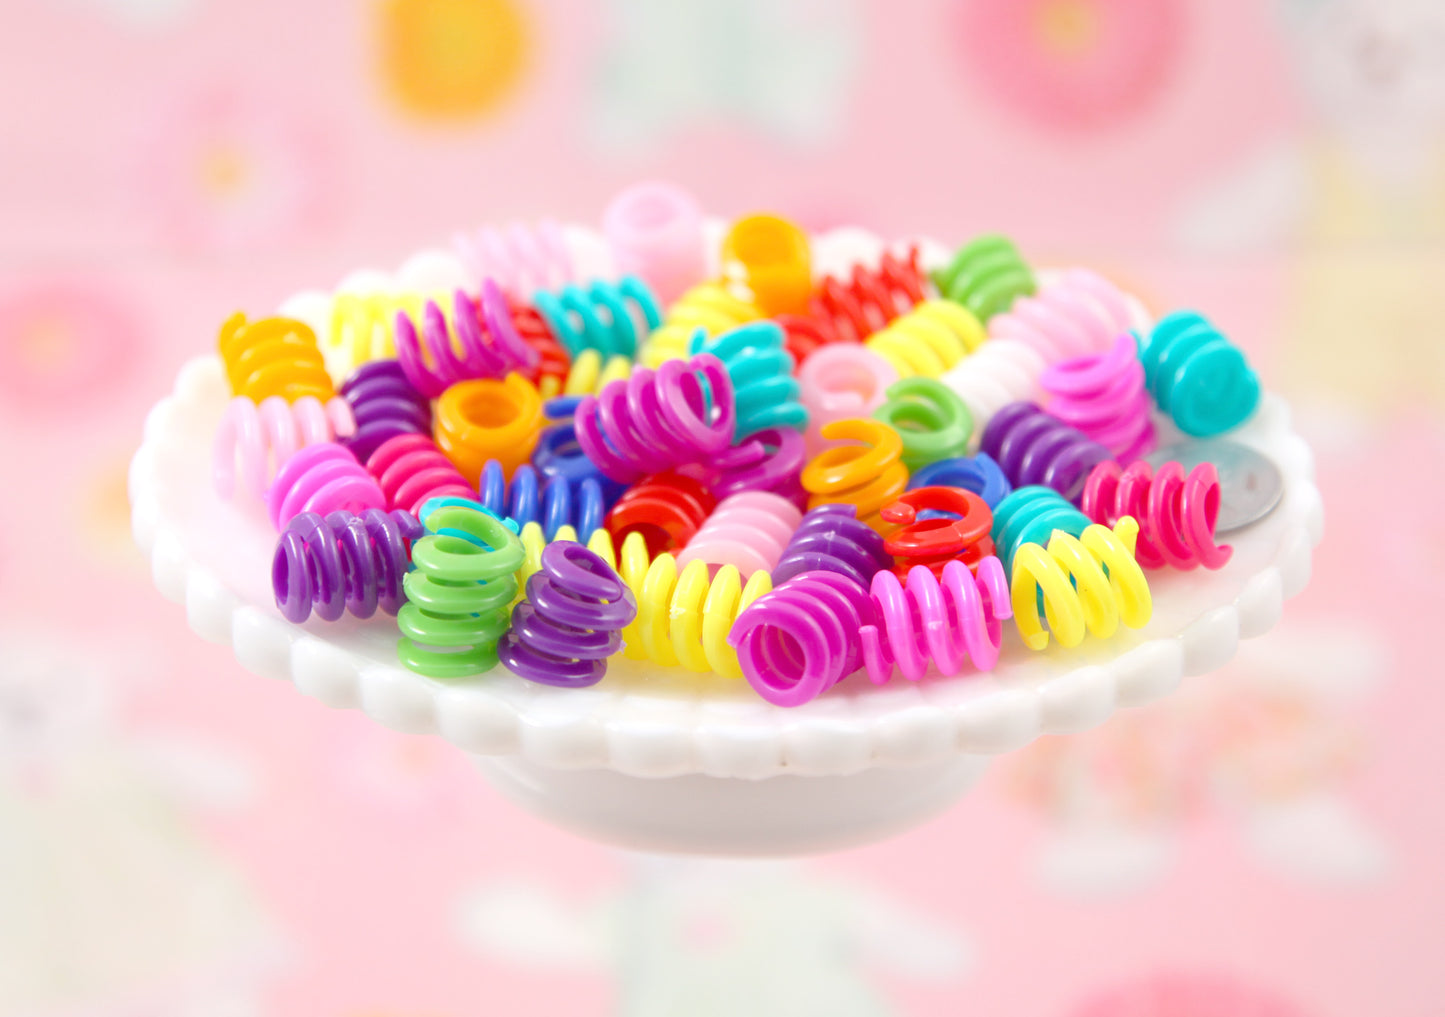 Spiral Beads - 17mm Spring Shape Curly Spiral Acrylic or Plastic Beads - 50 pcs set